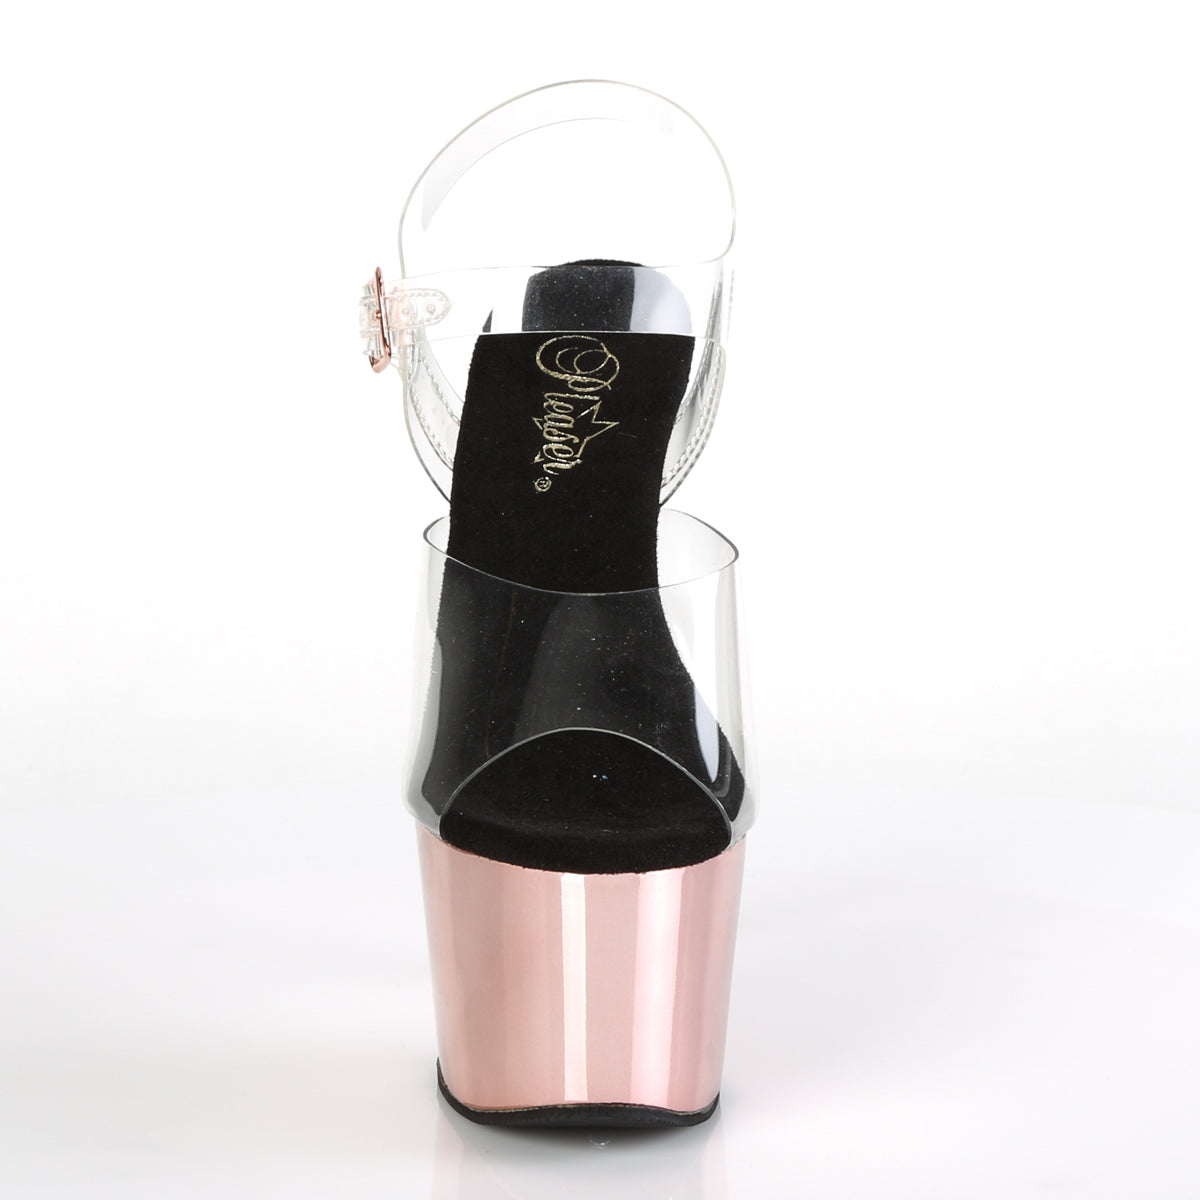 ADORE-708 7" Clear and Rose Gold Chrome Fetish Shoes